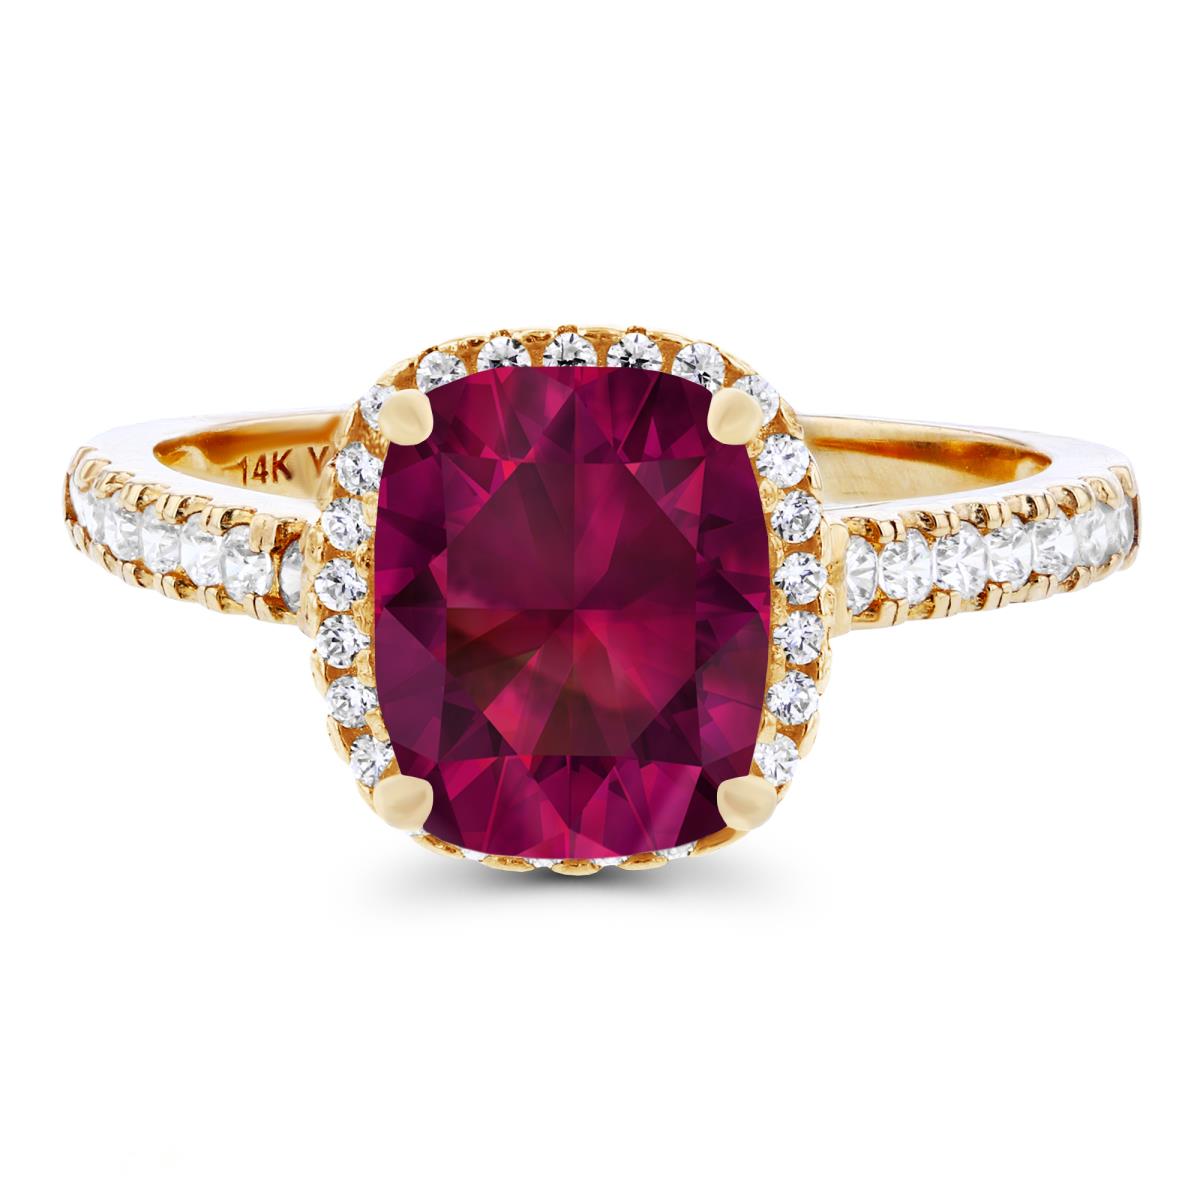 14K Yellow Gold 9x7mm Cushion Created Ruby & Created White Sapphire Halo Ring